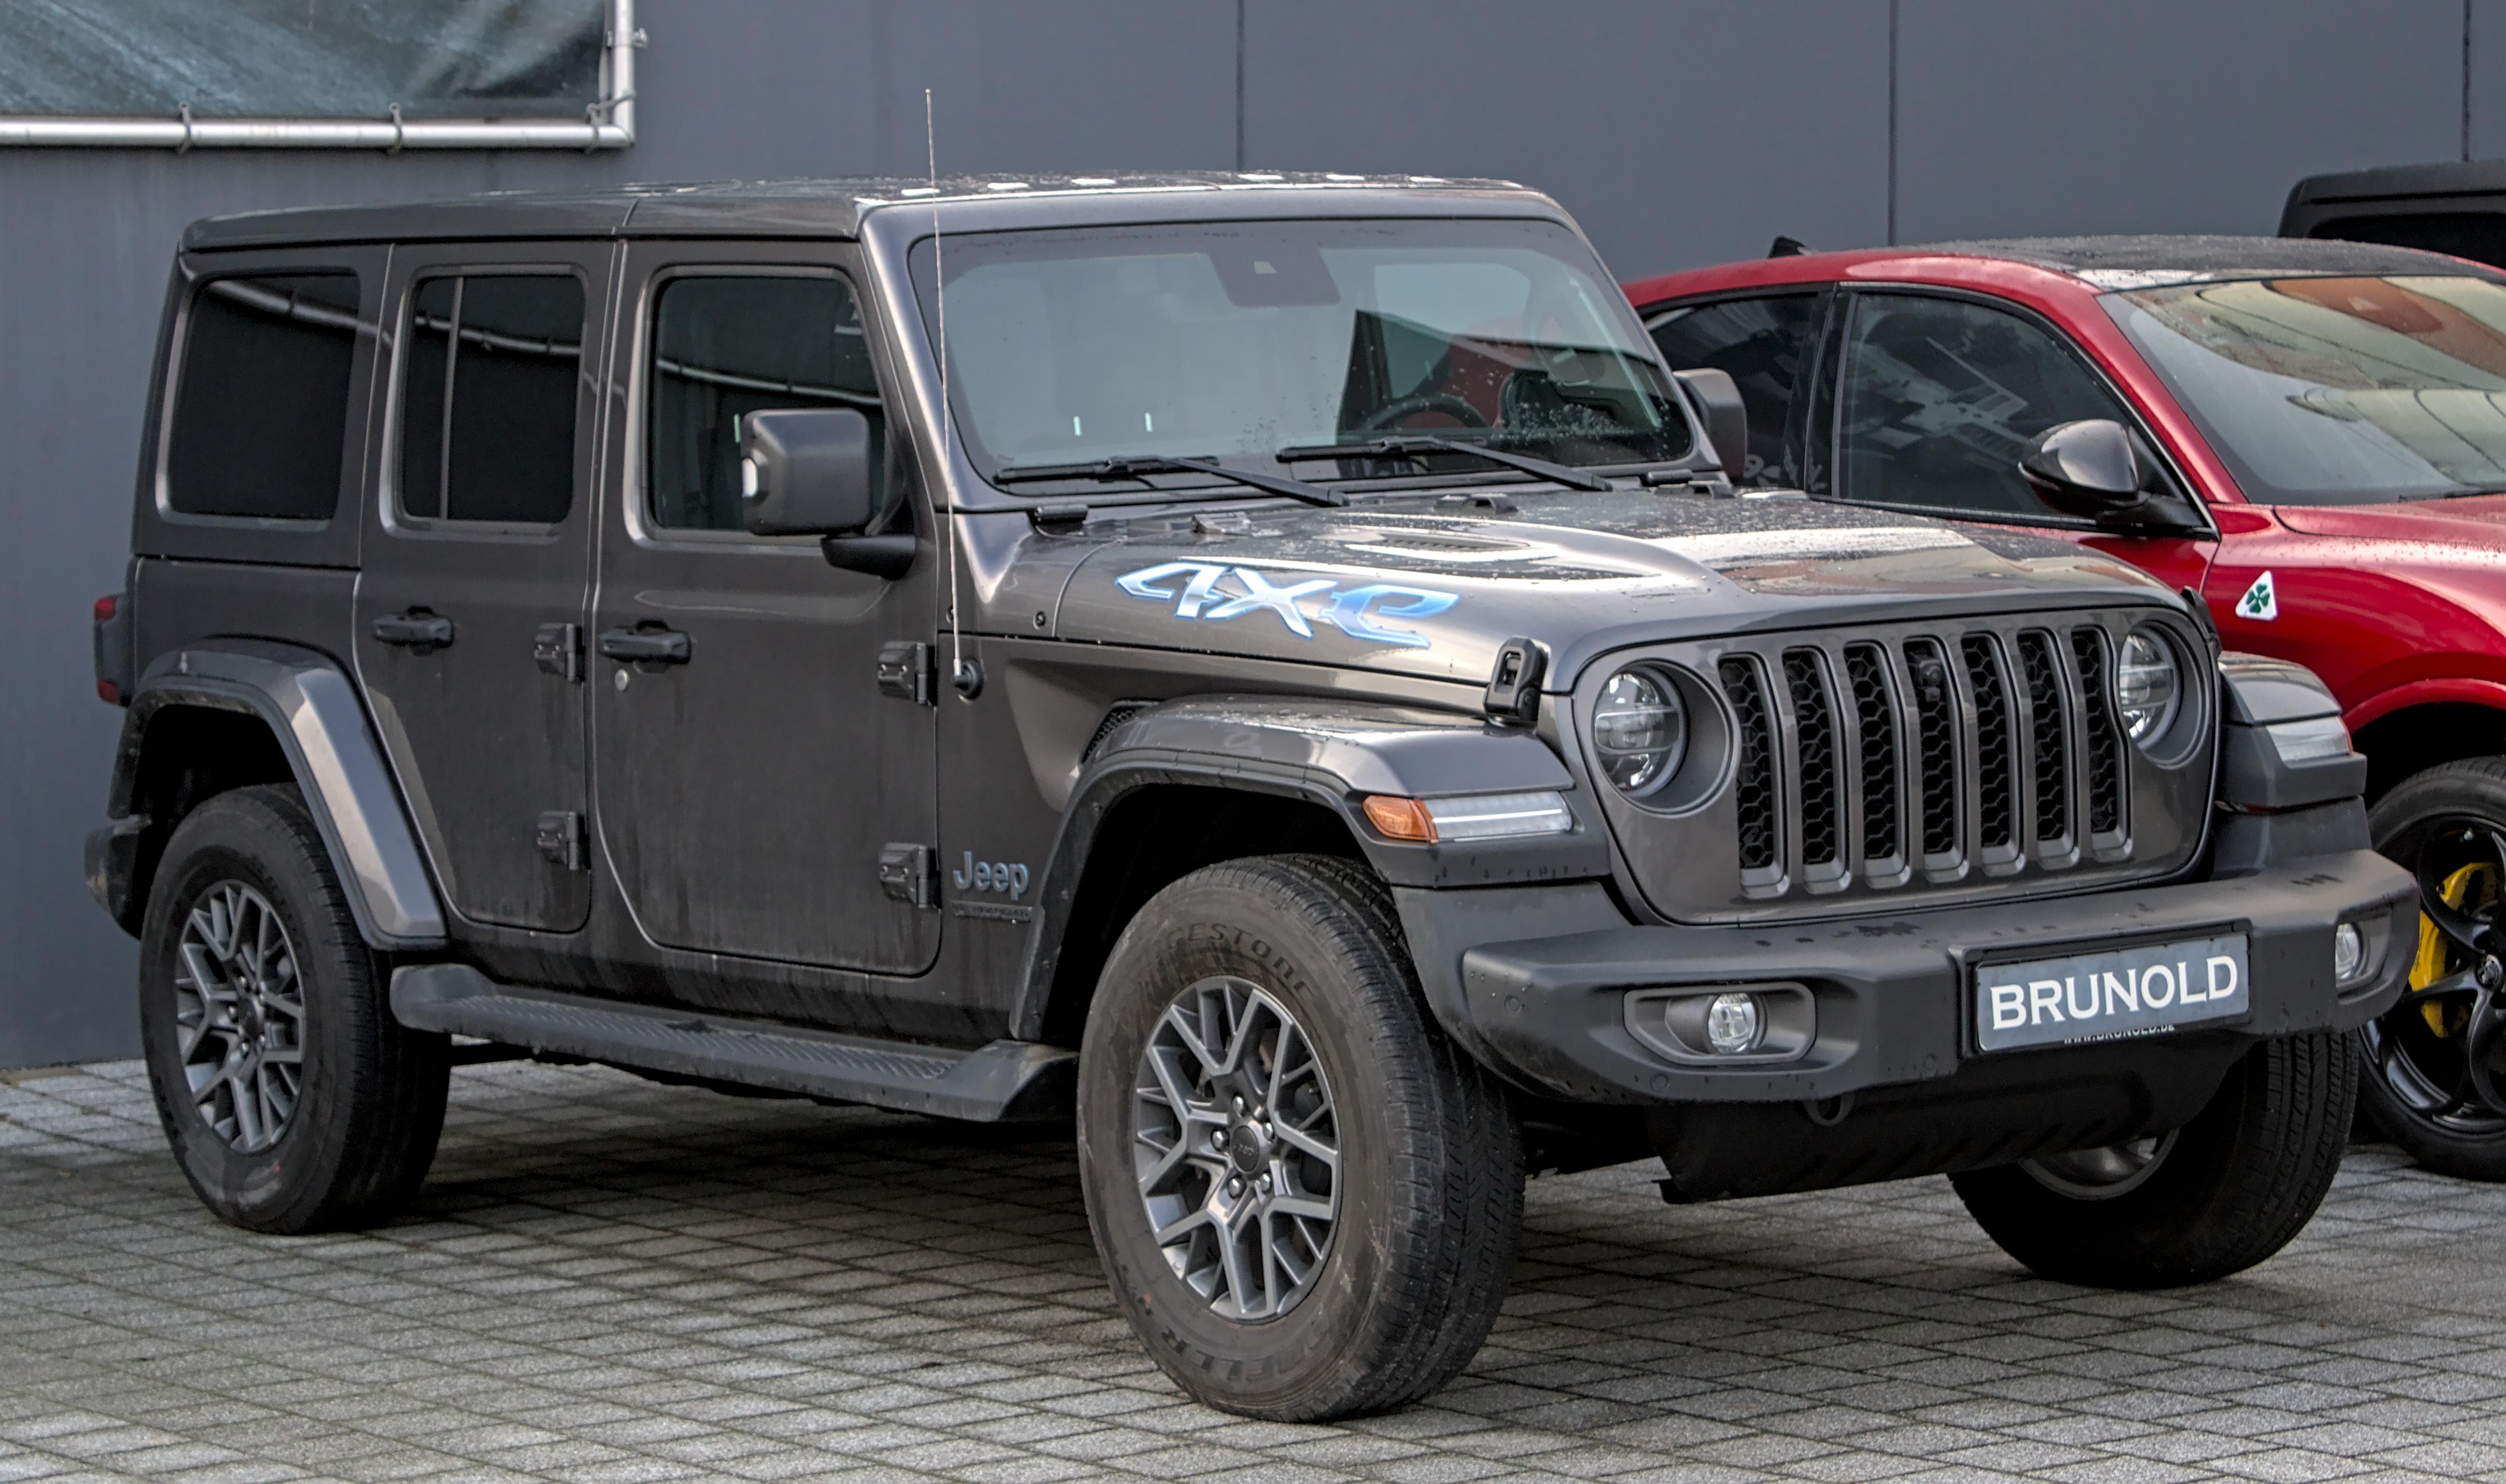 Recommended Brands for Jeep Wrangler​ Engine Oil